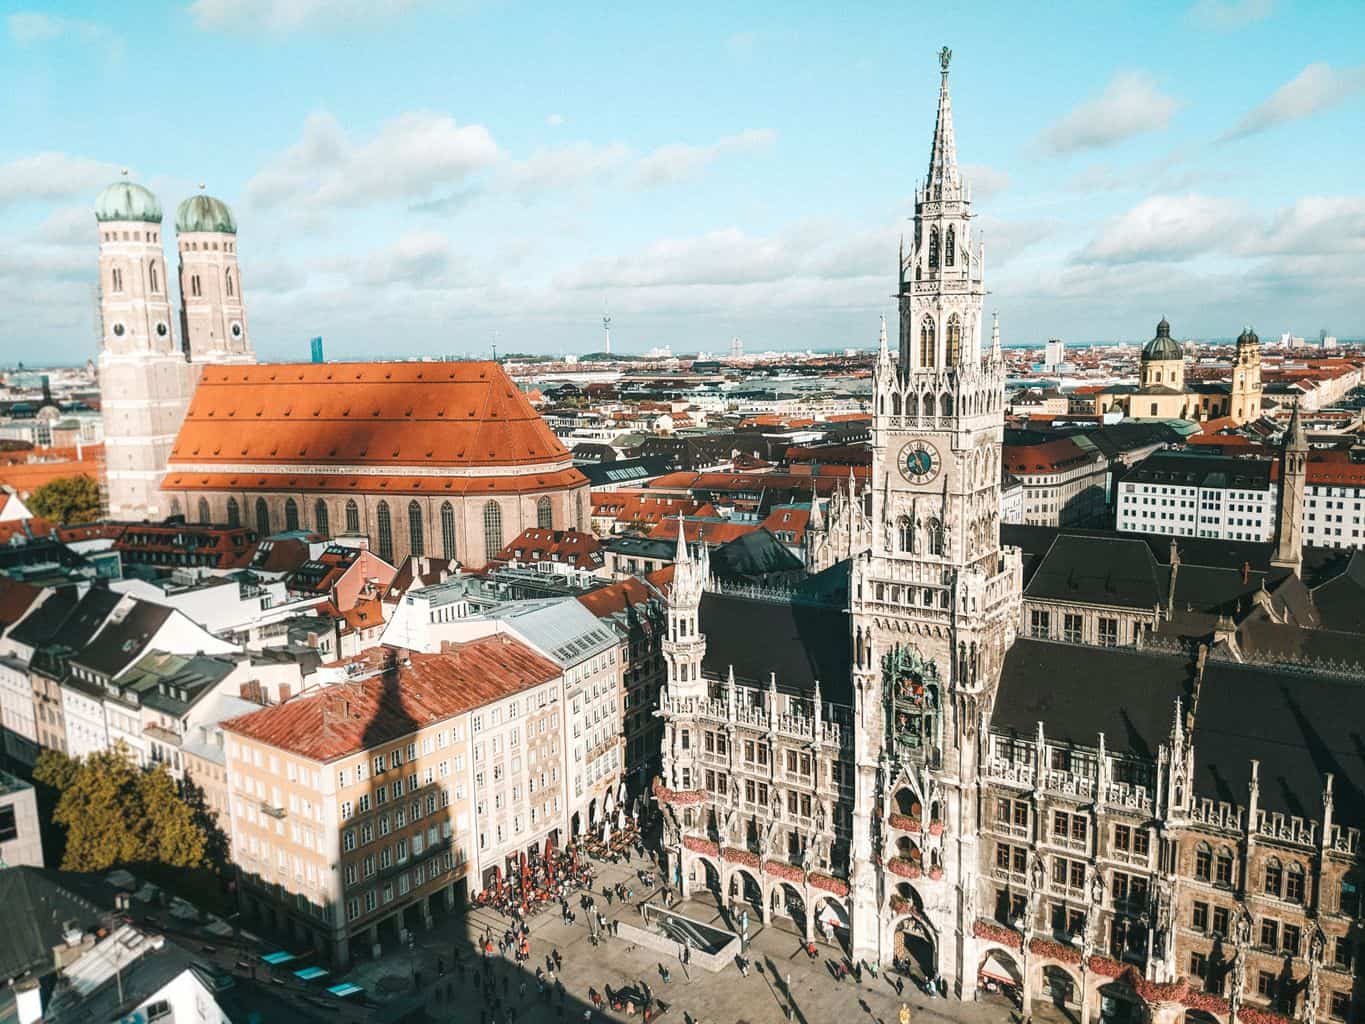 things to do in Munich, places to visit in Munich, sights in Munich, Munich sightseeing, Munich tourist attractions